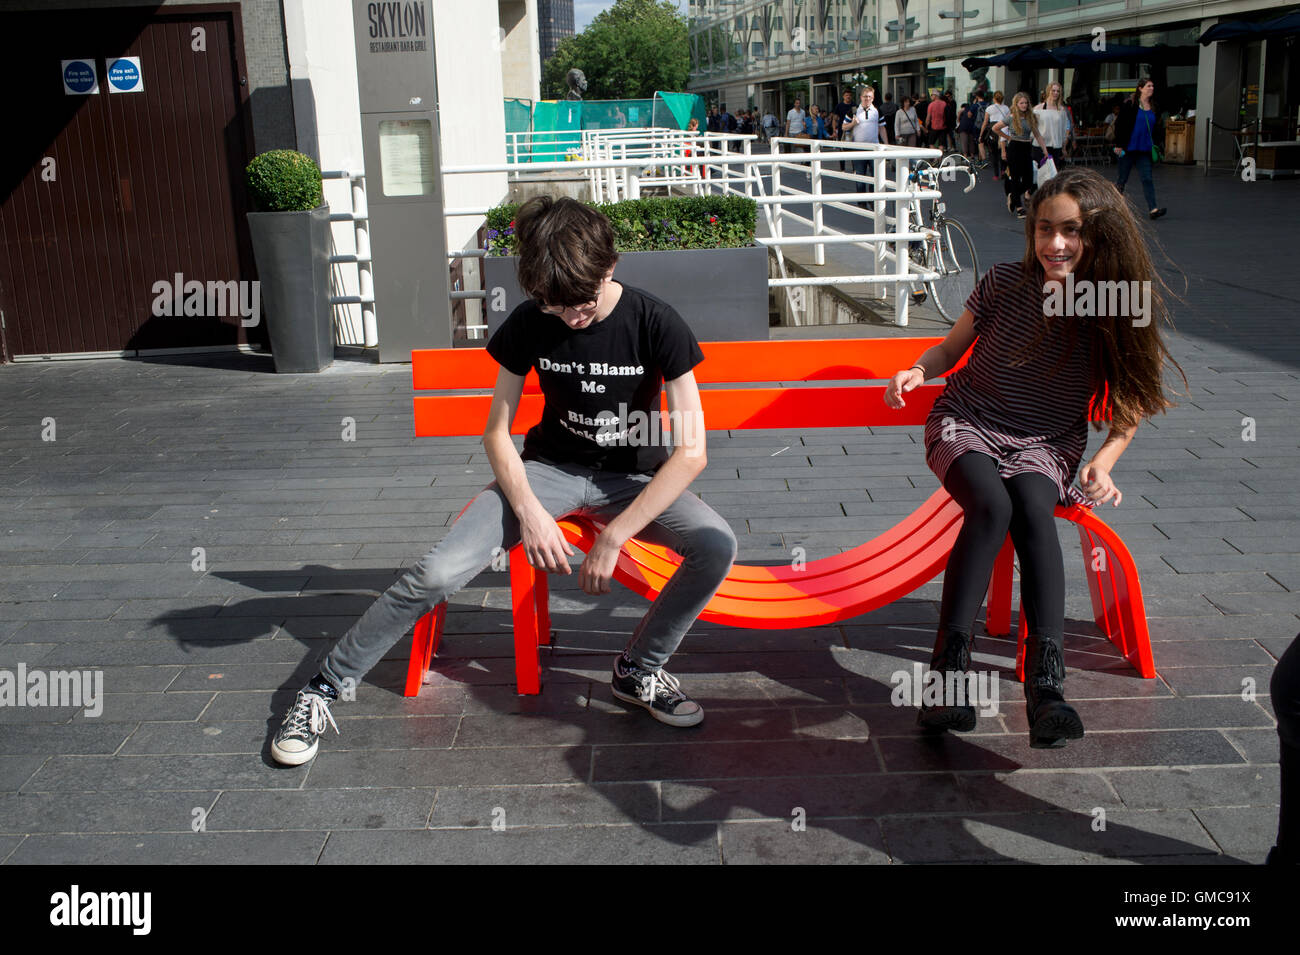 London.South Bank. Modified social bench NY. A young boy and girl play on Jeppe Hein's reinvention of the park bench Stock Photo